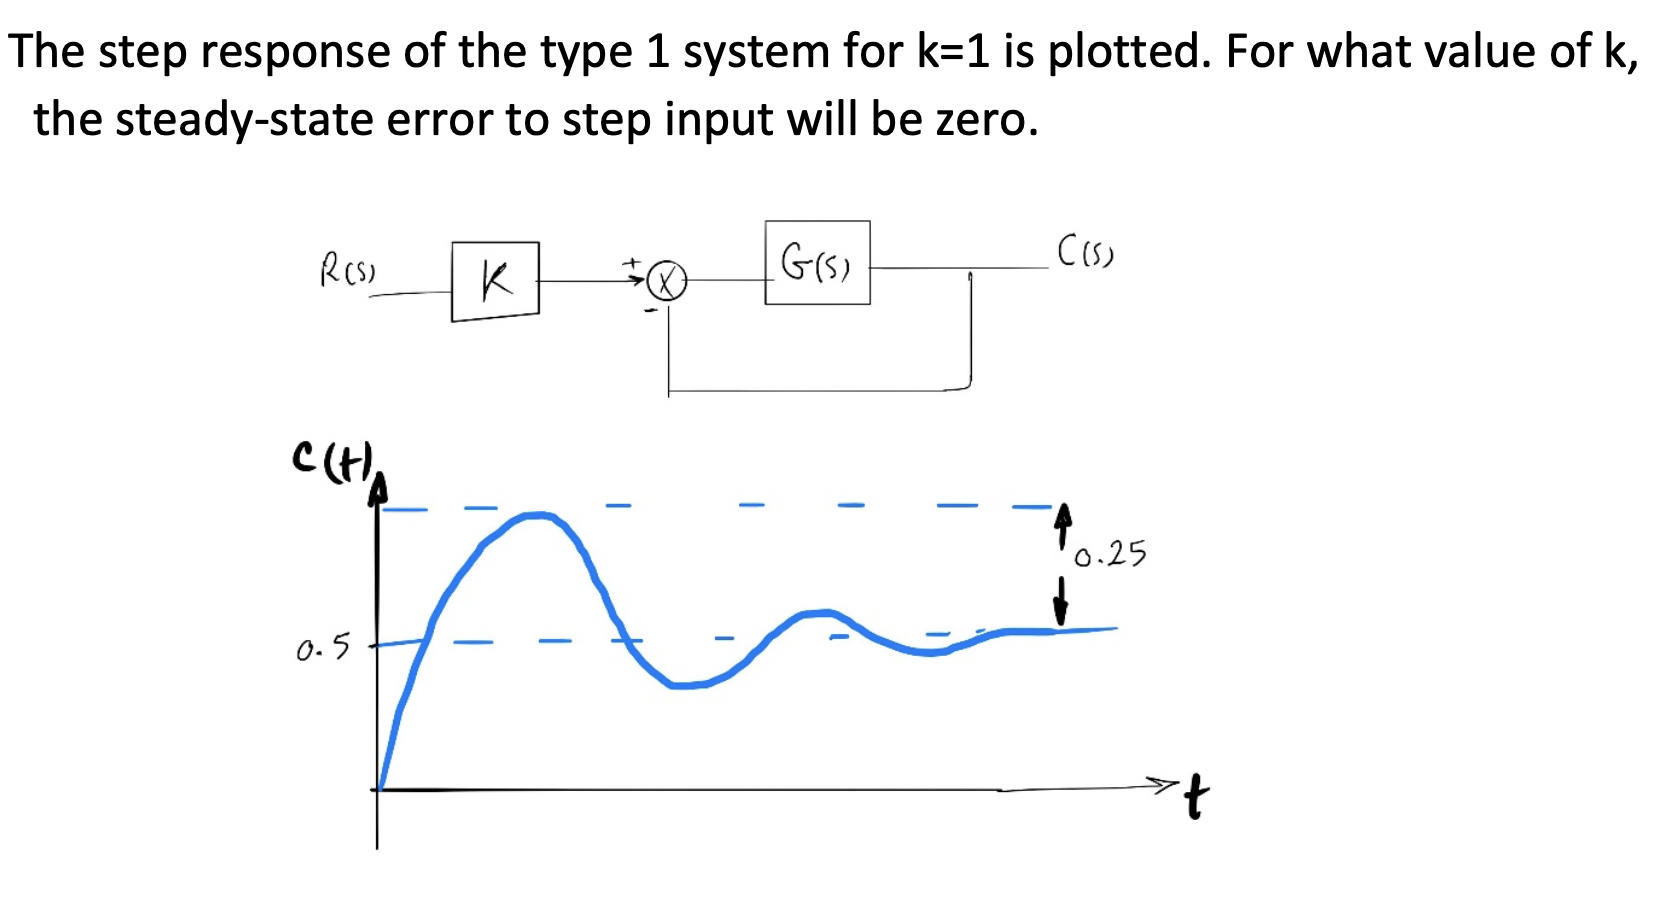 The step response of the type 1 system for k=1 is plotted. For what value of k,
the steady-state error to step input will be zero.
K
G(s)
C(H,
0.25
0-5
t.
